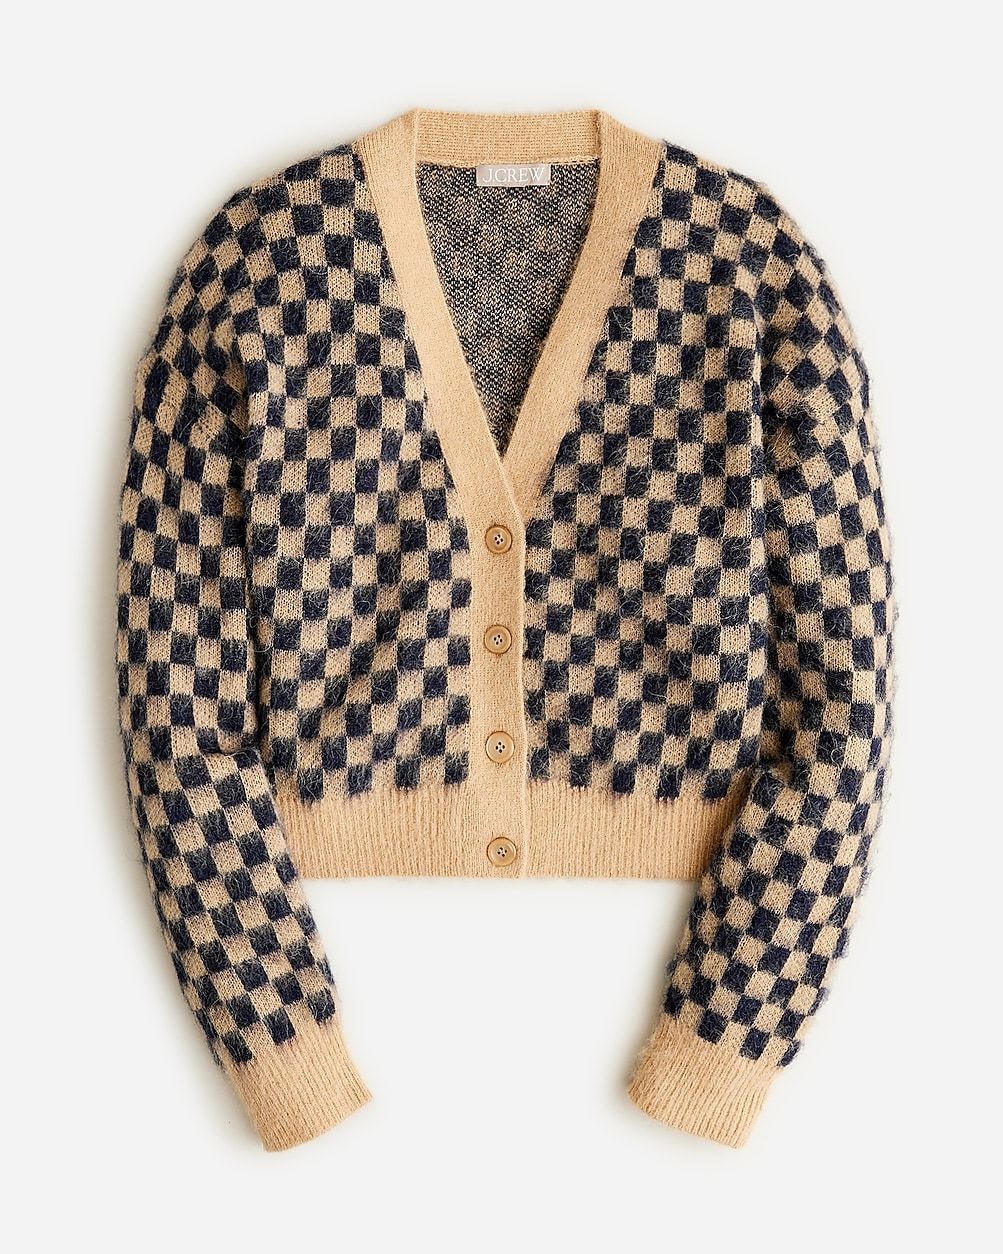 Checkered V-neck cardigan sweater in brushed yarn | J.Crew US